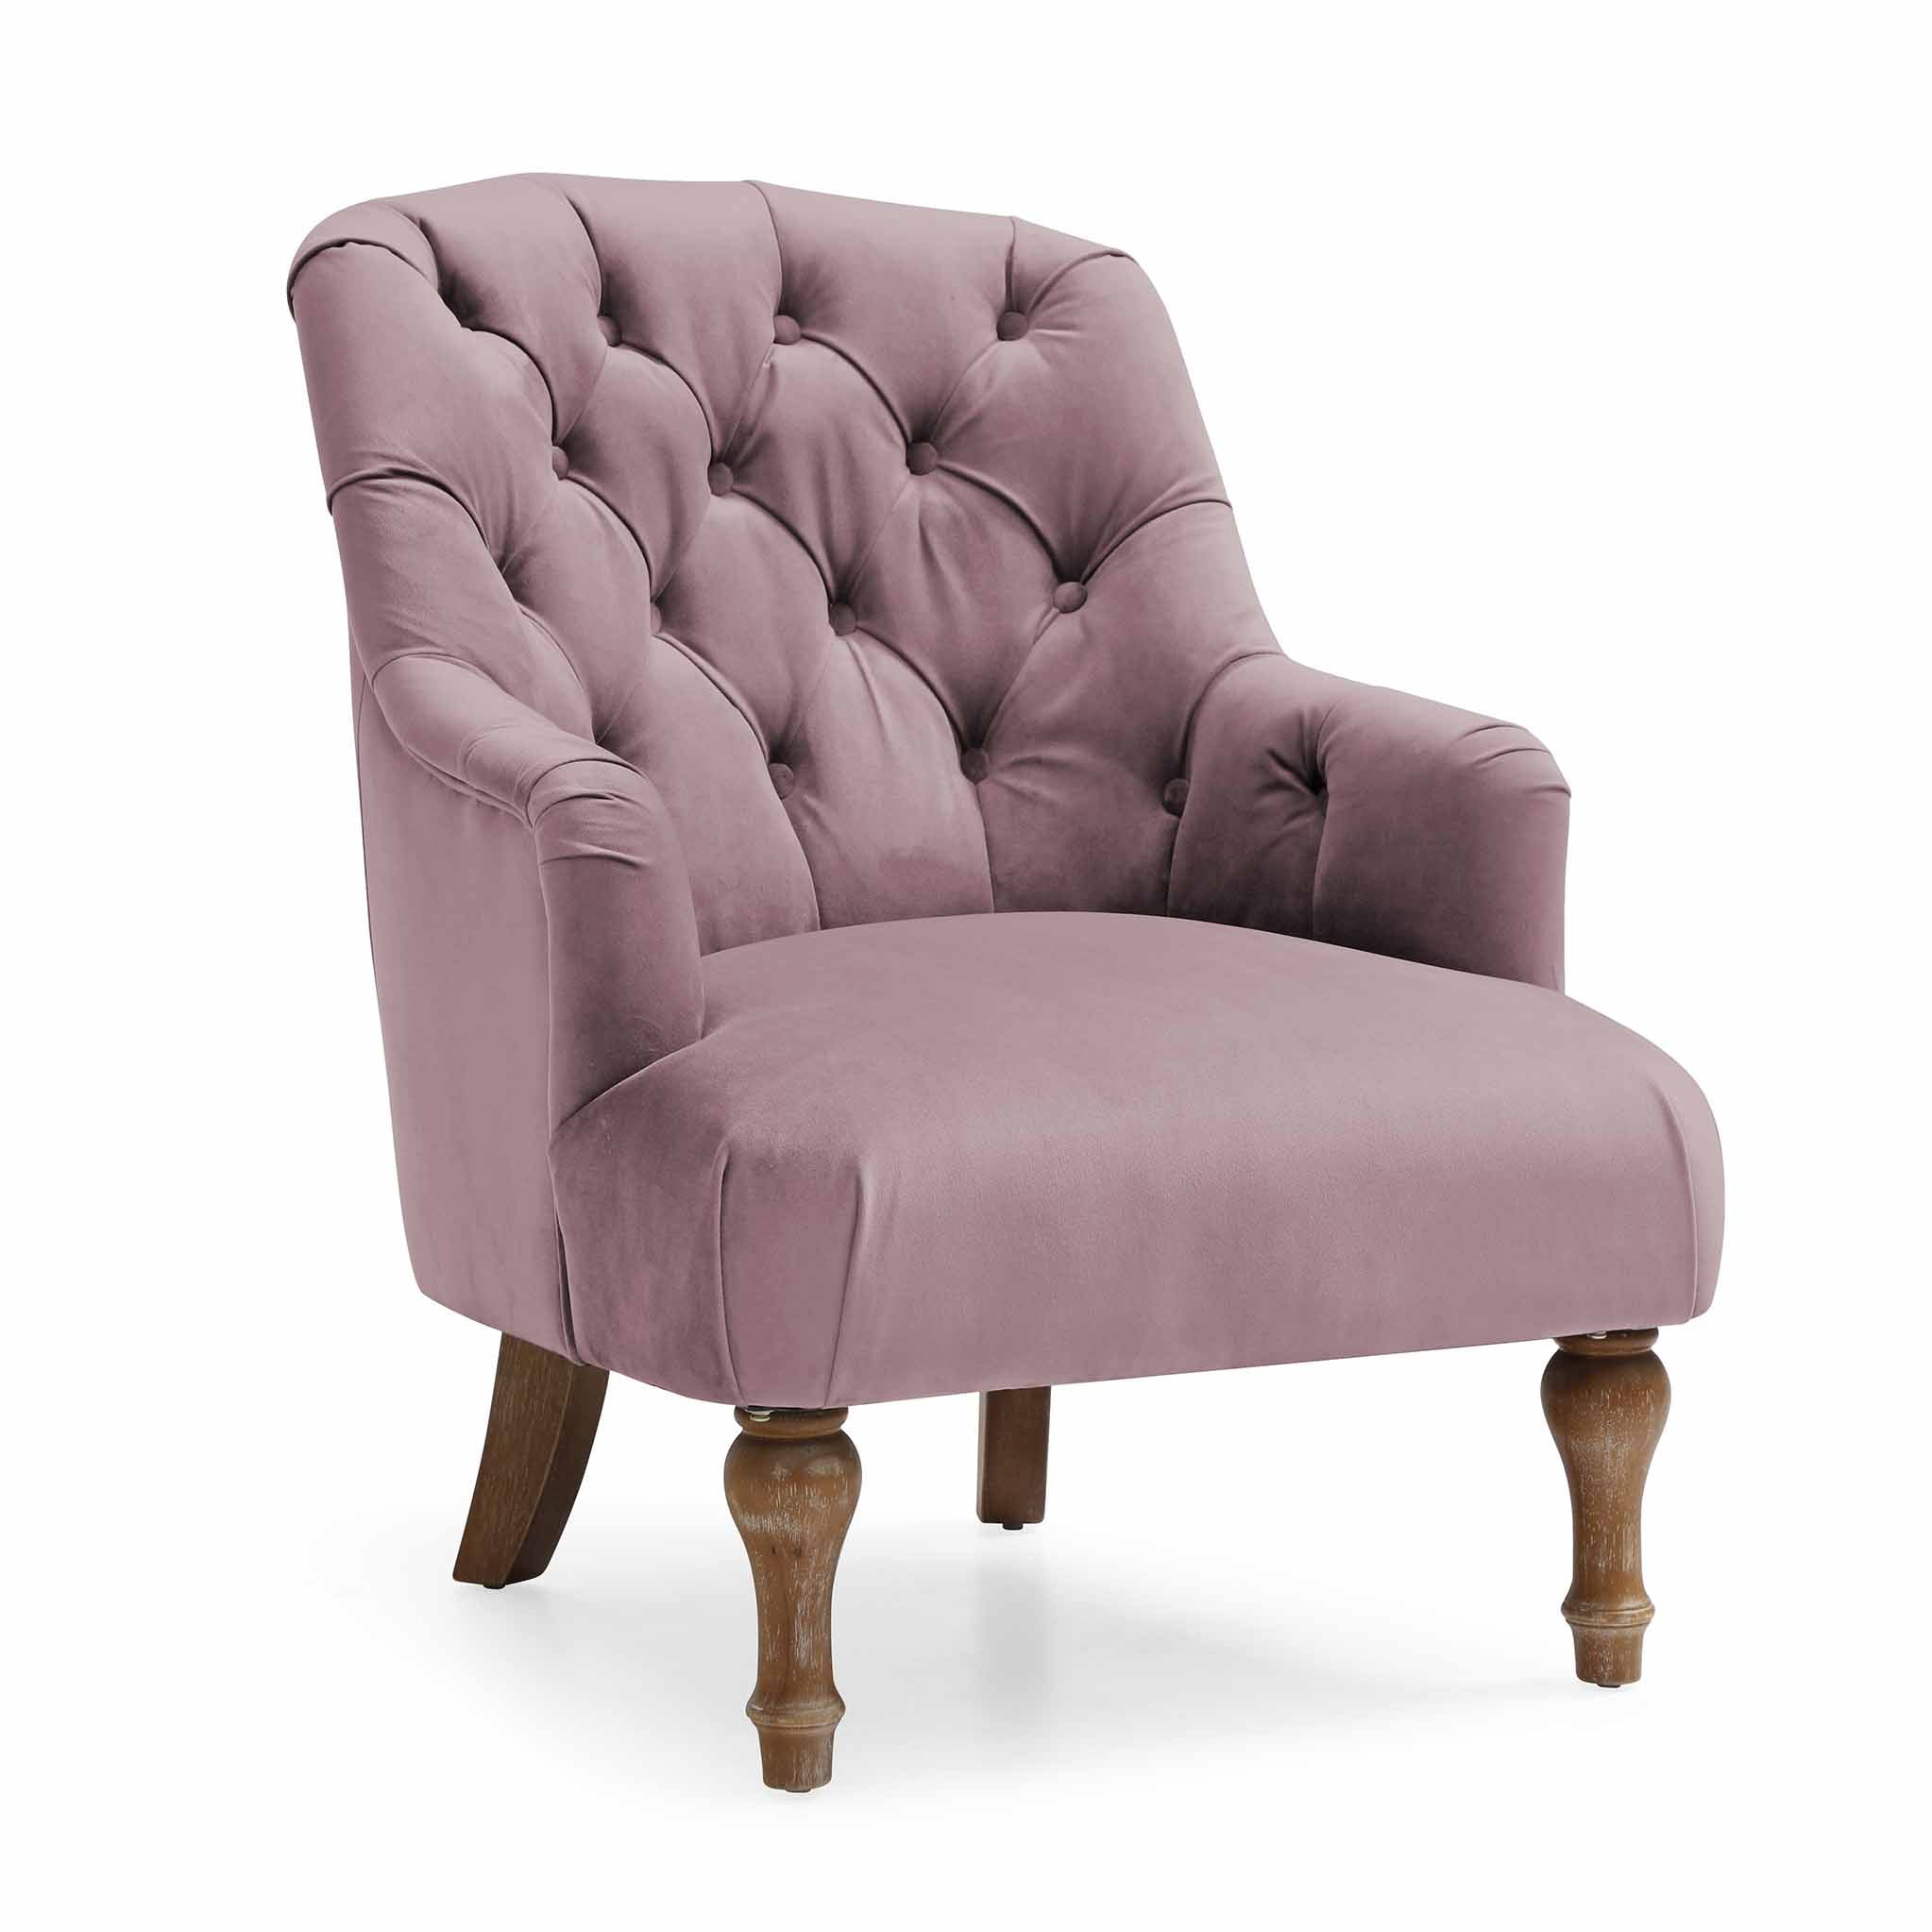 Bianca Traditional Armchair Classic Velvet Accent Chair Occasional Upholstered Statement Seat For Living Room Bedroom